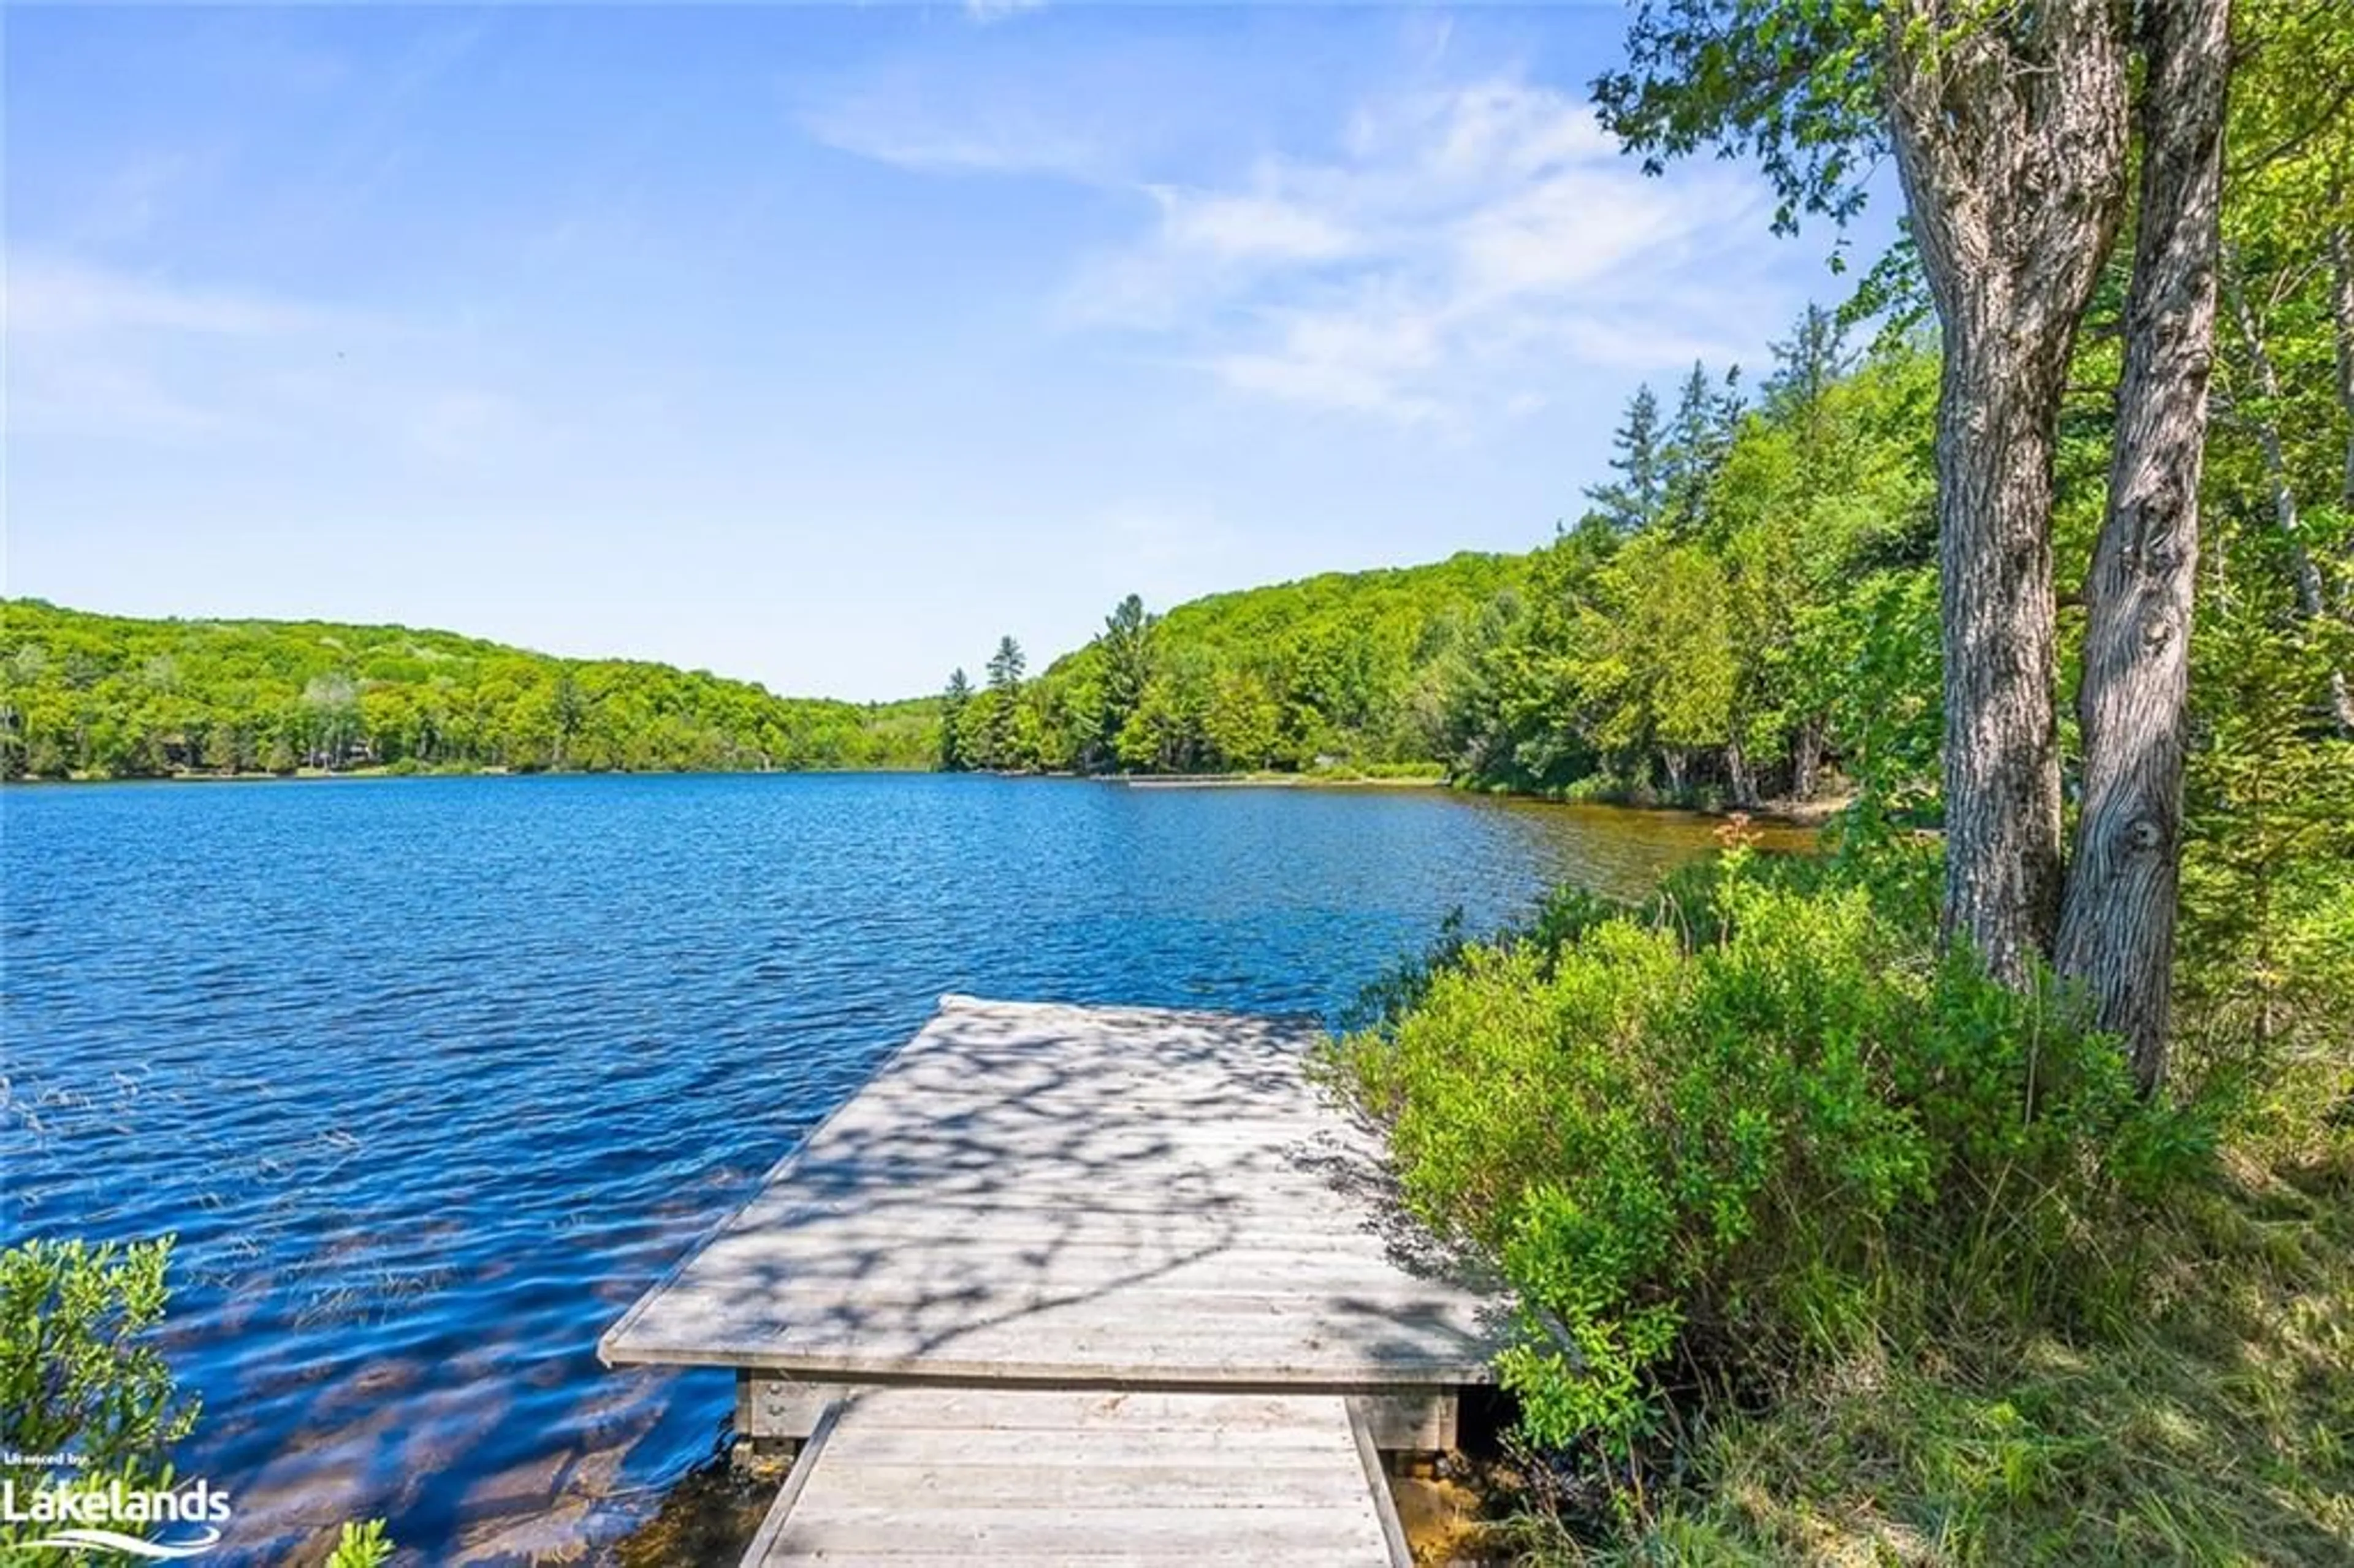 Lakeview for 1037 Dudley Rd, Haliburton Ontario K0M 1S0